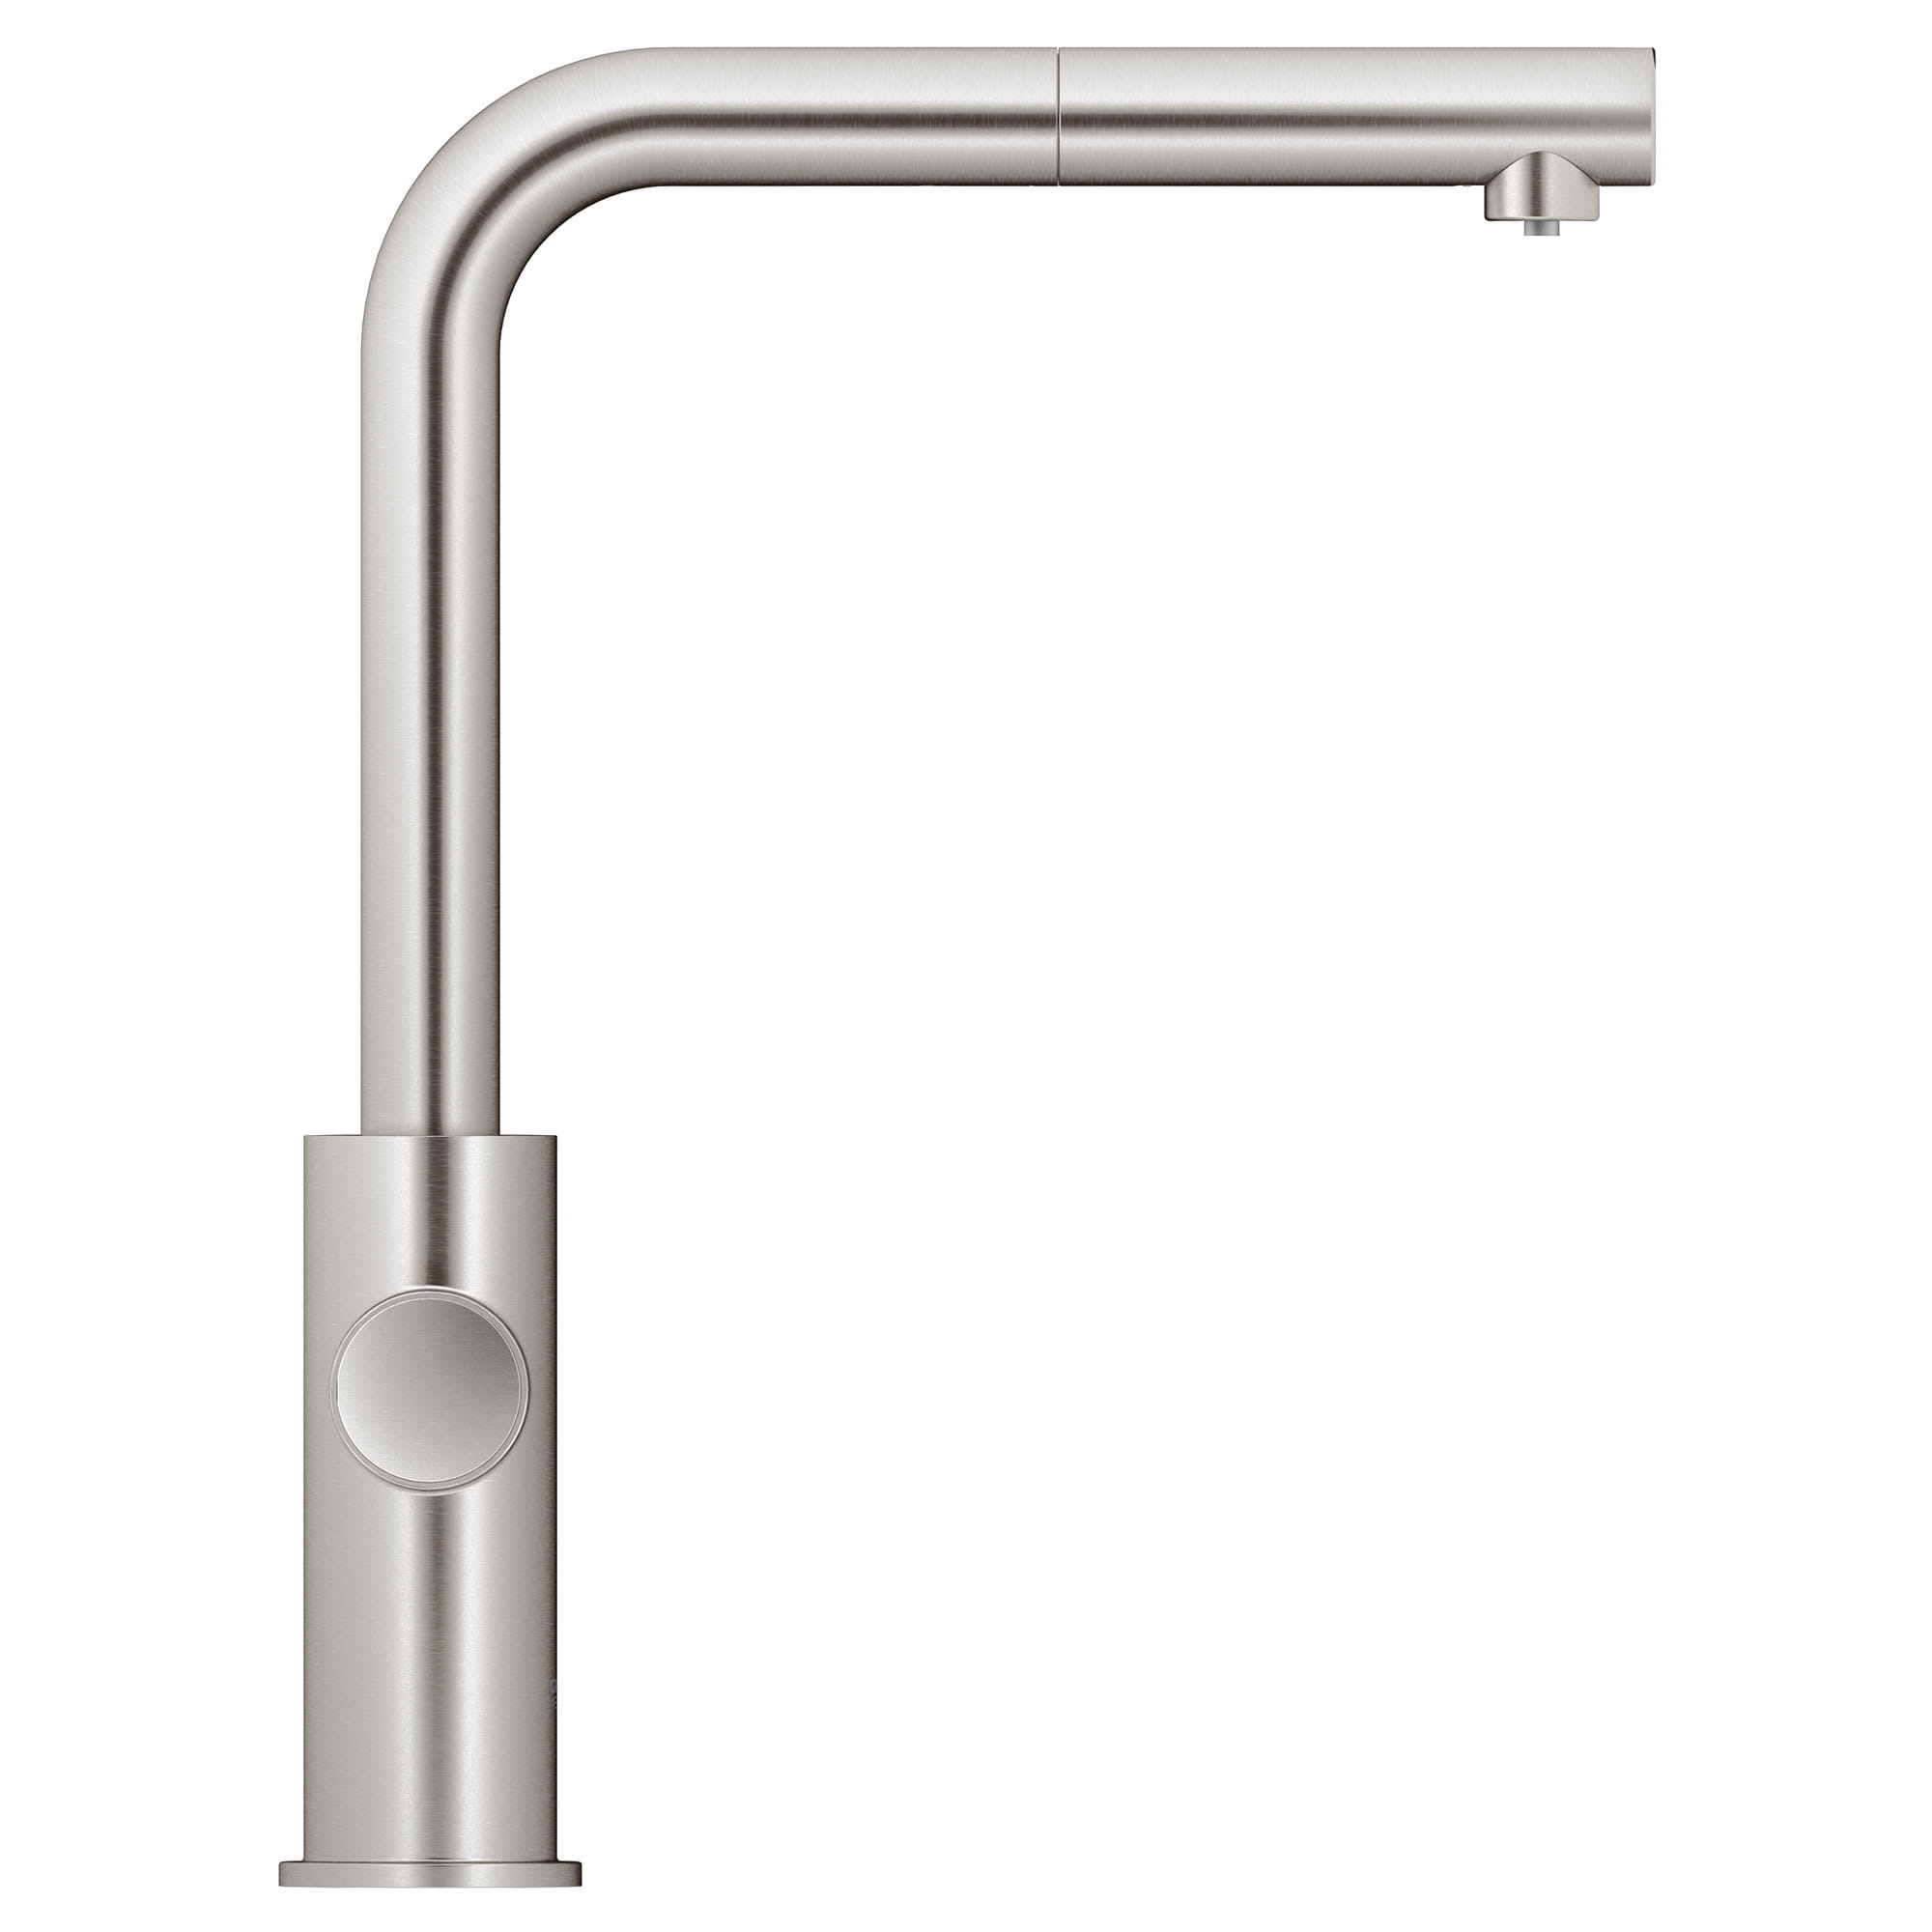 Single-Handle Pull-Out Kitchen Faucet Single Spray 1.75gpm With Chilled & Sparkling Water